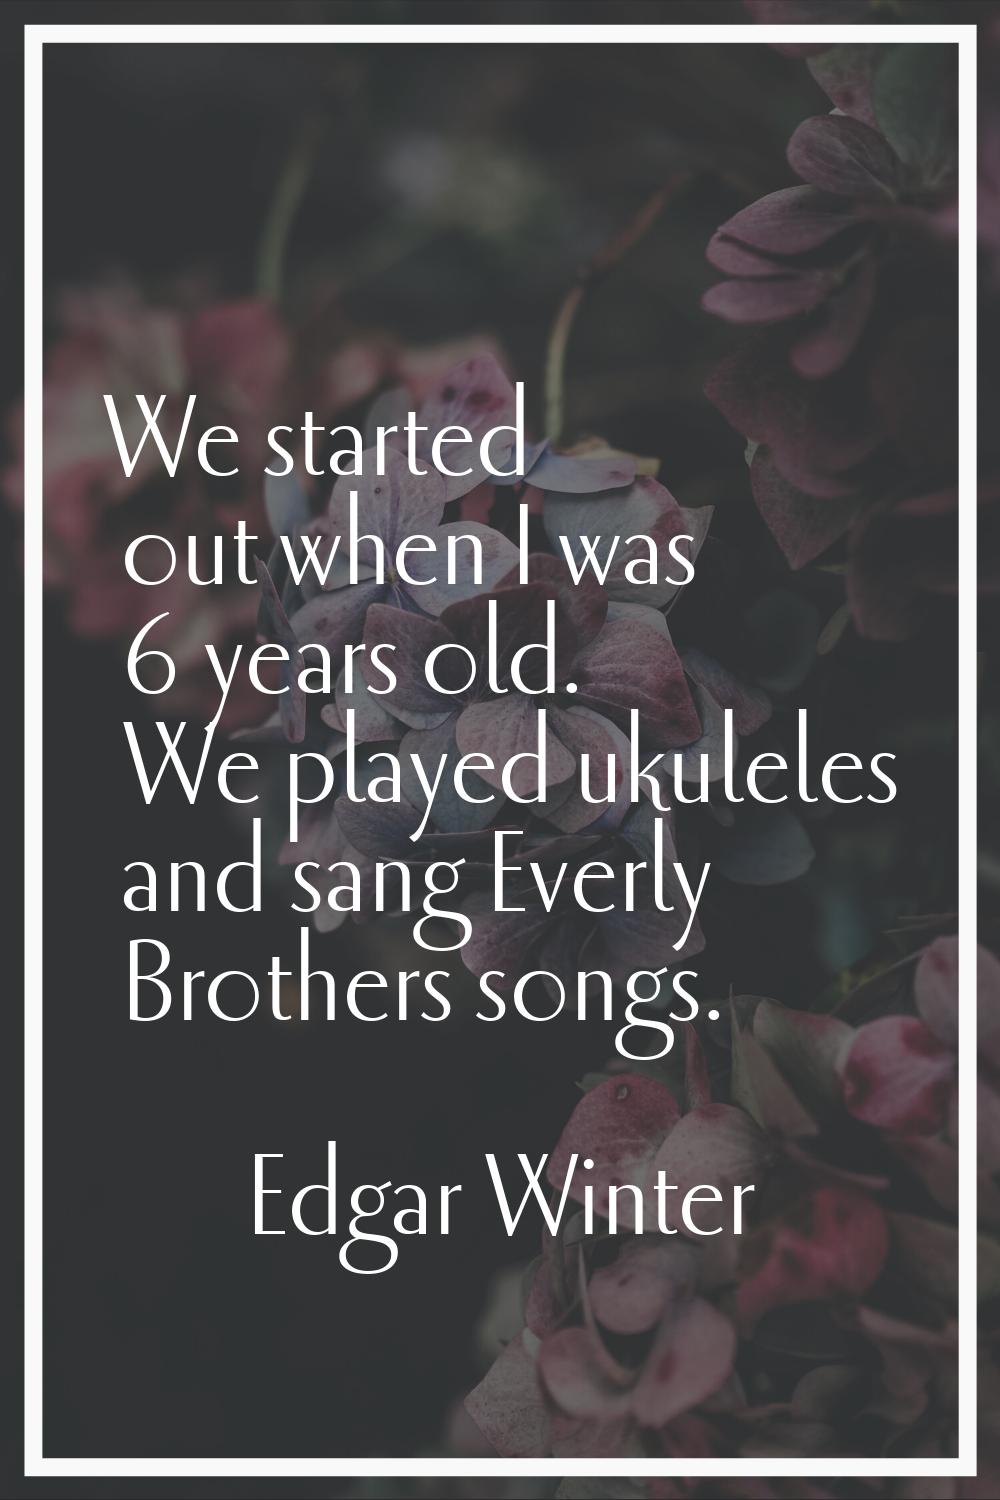 We started out when I was 6 years old. We played ukuleles and sang Everly Brothers songs.